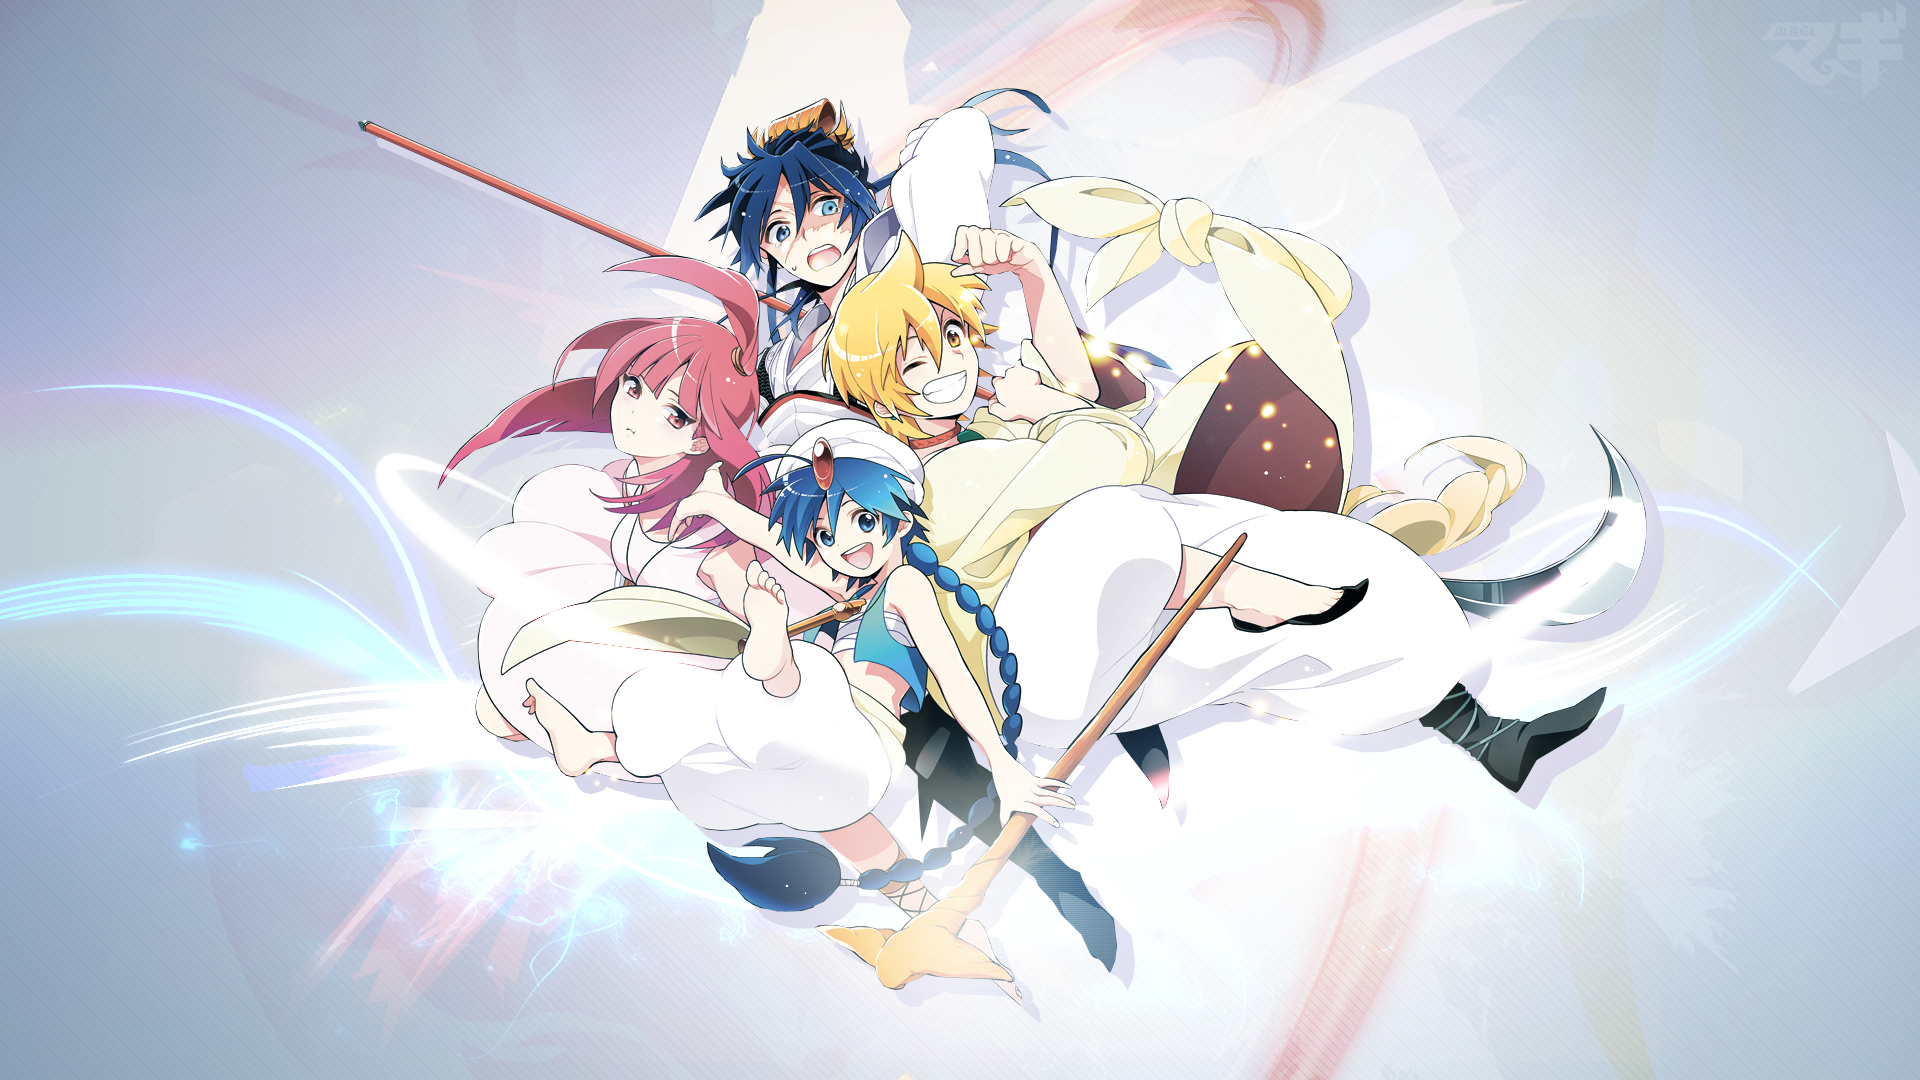 Anime Magi The Labyrinth Of Magic Wallpapers.